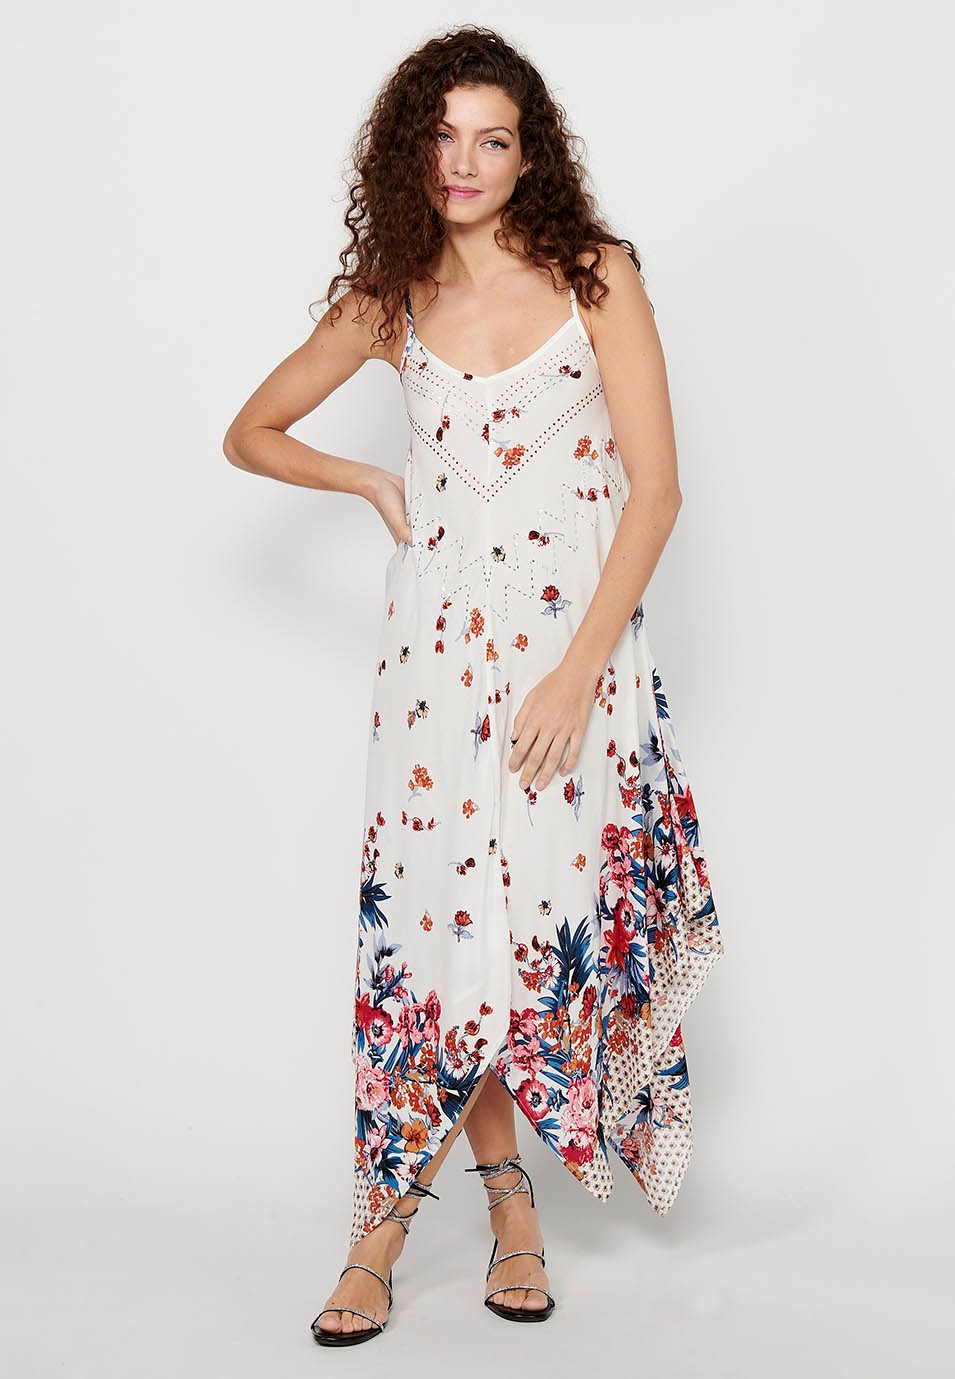 Strap Dress with V-neckline and White Floral Print for Women 4